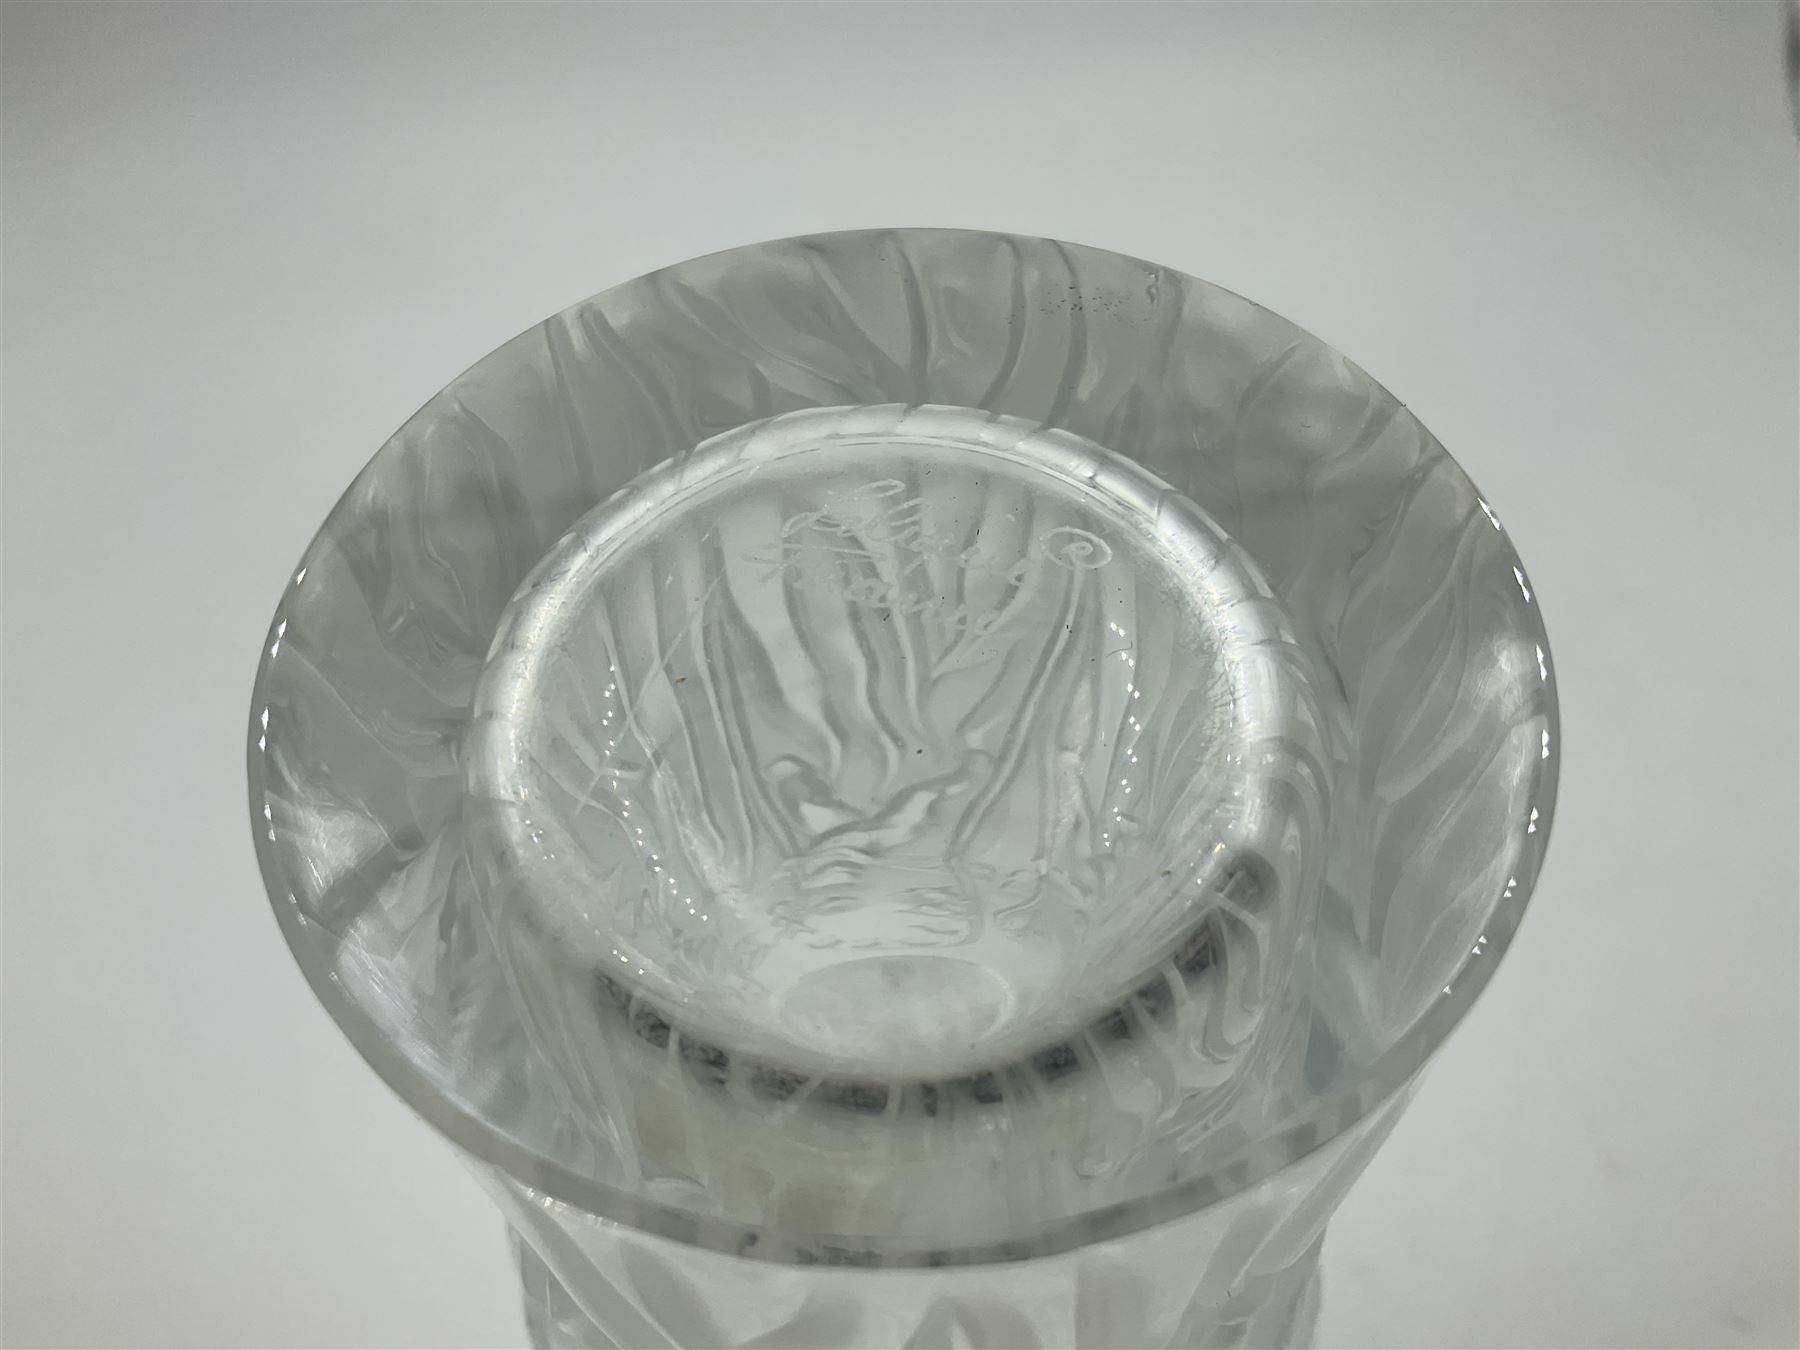 Lalique Elves frosted glass vase - Image 5 of 6